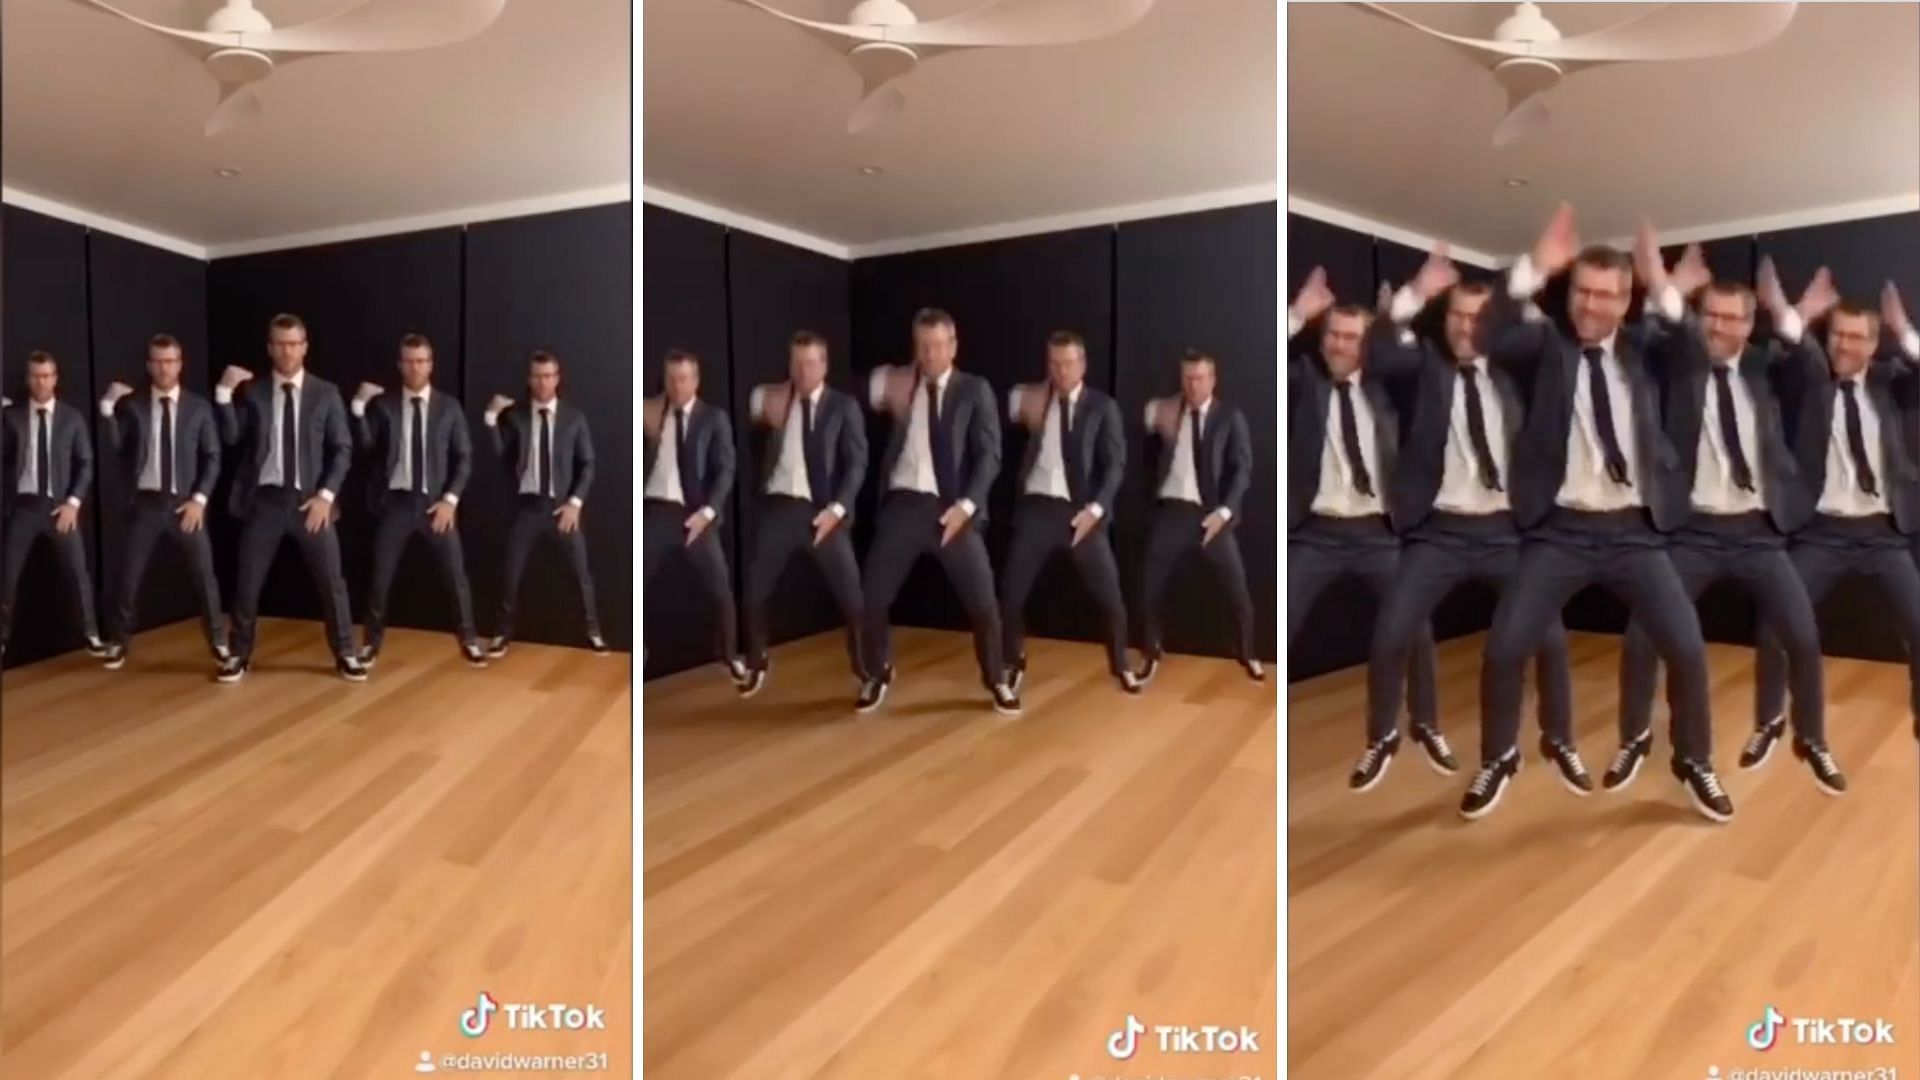 David Warner is seen dancing to the tunes of the Bollywood song ‘Bala’ in his new Tik Tok video.